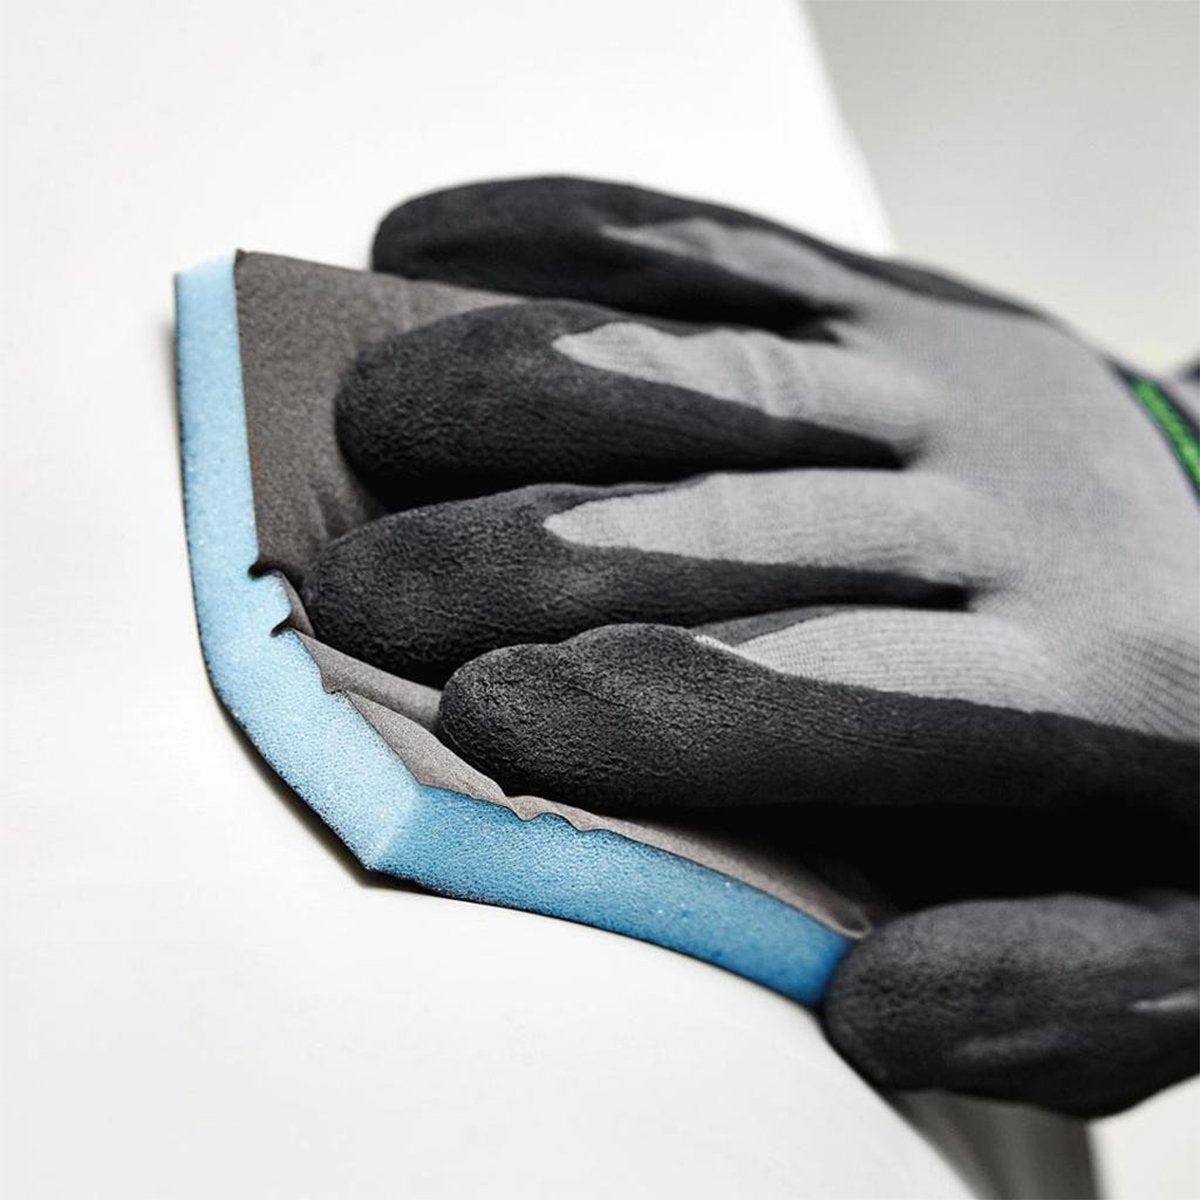 A gloved hand presses an abrasive sponge into a concave surface and the foam distributes the pressure evenly.